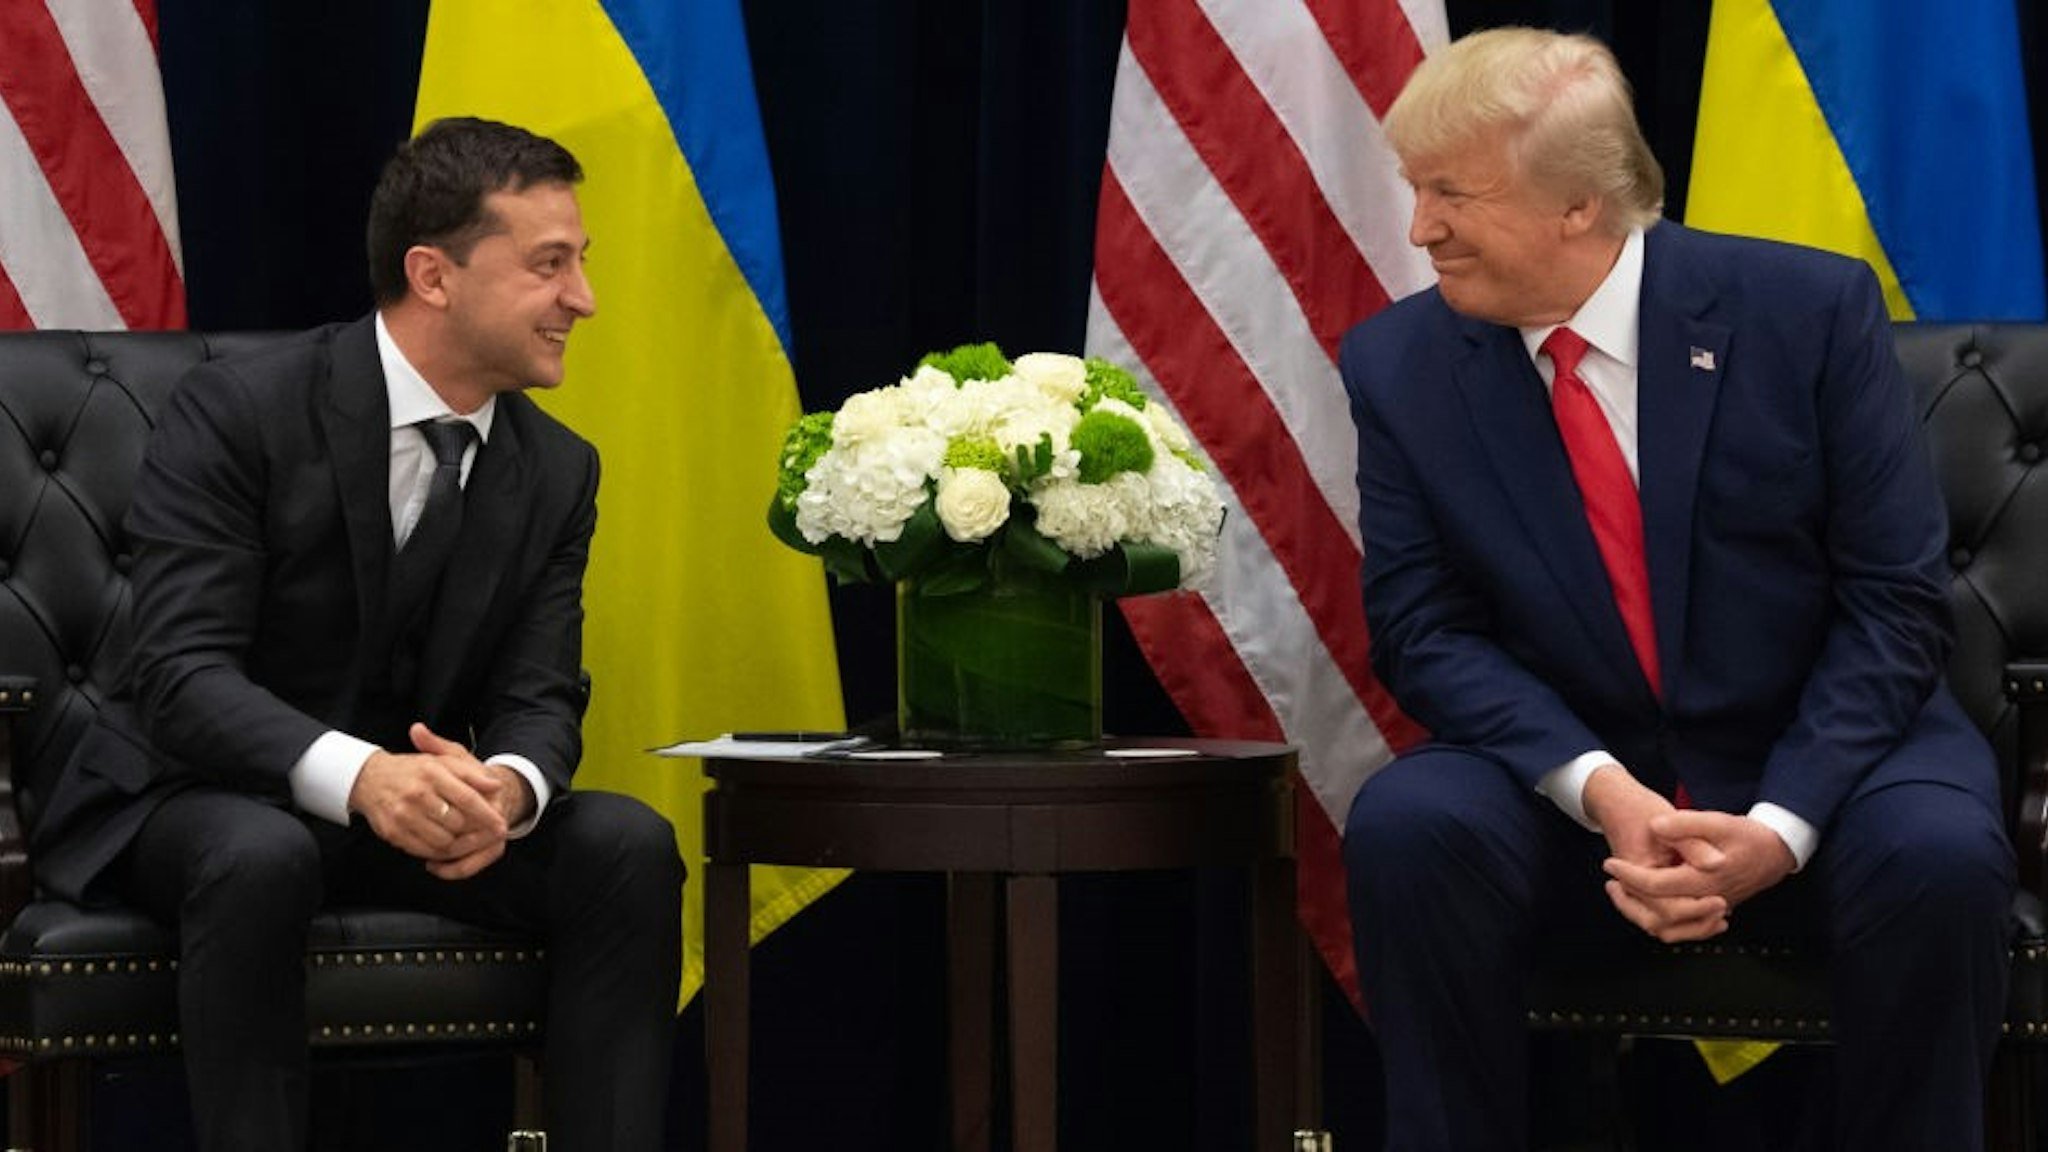 US President Donald Trump and Ukrainian President Volodymyr Zelensky speak during a meeting in New York on September 25, 2019, on the sidelines of the United Nations General Assembly